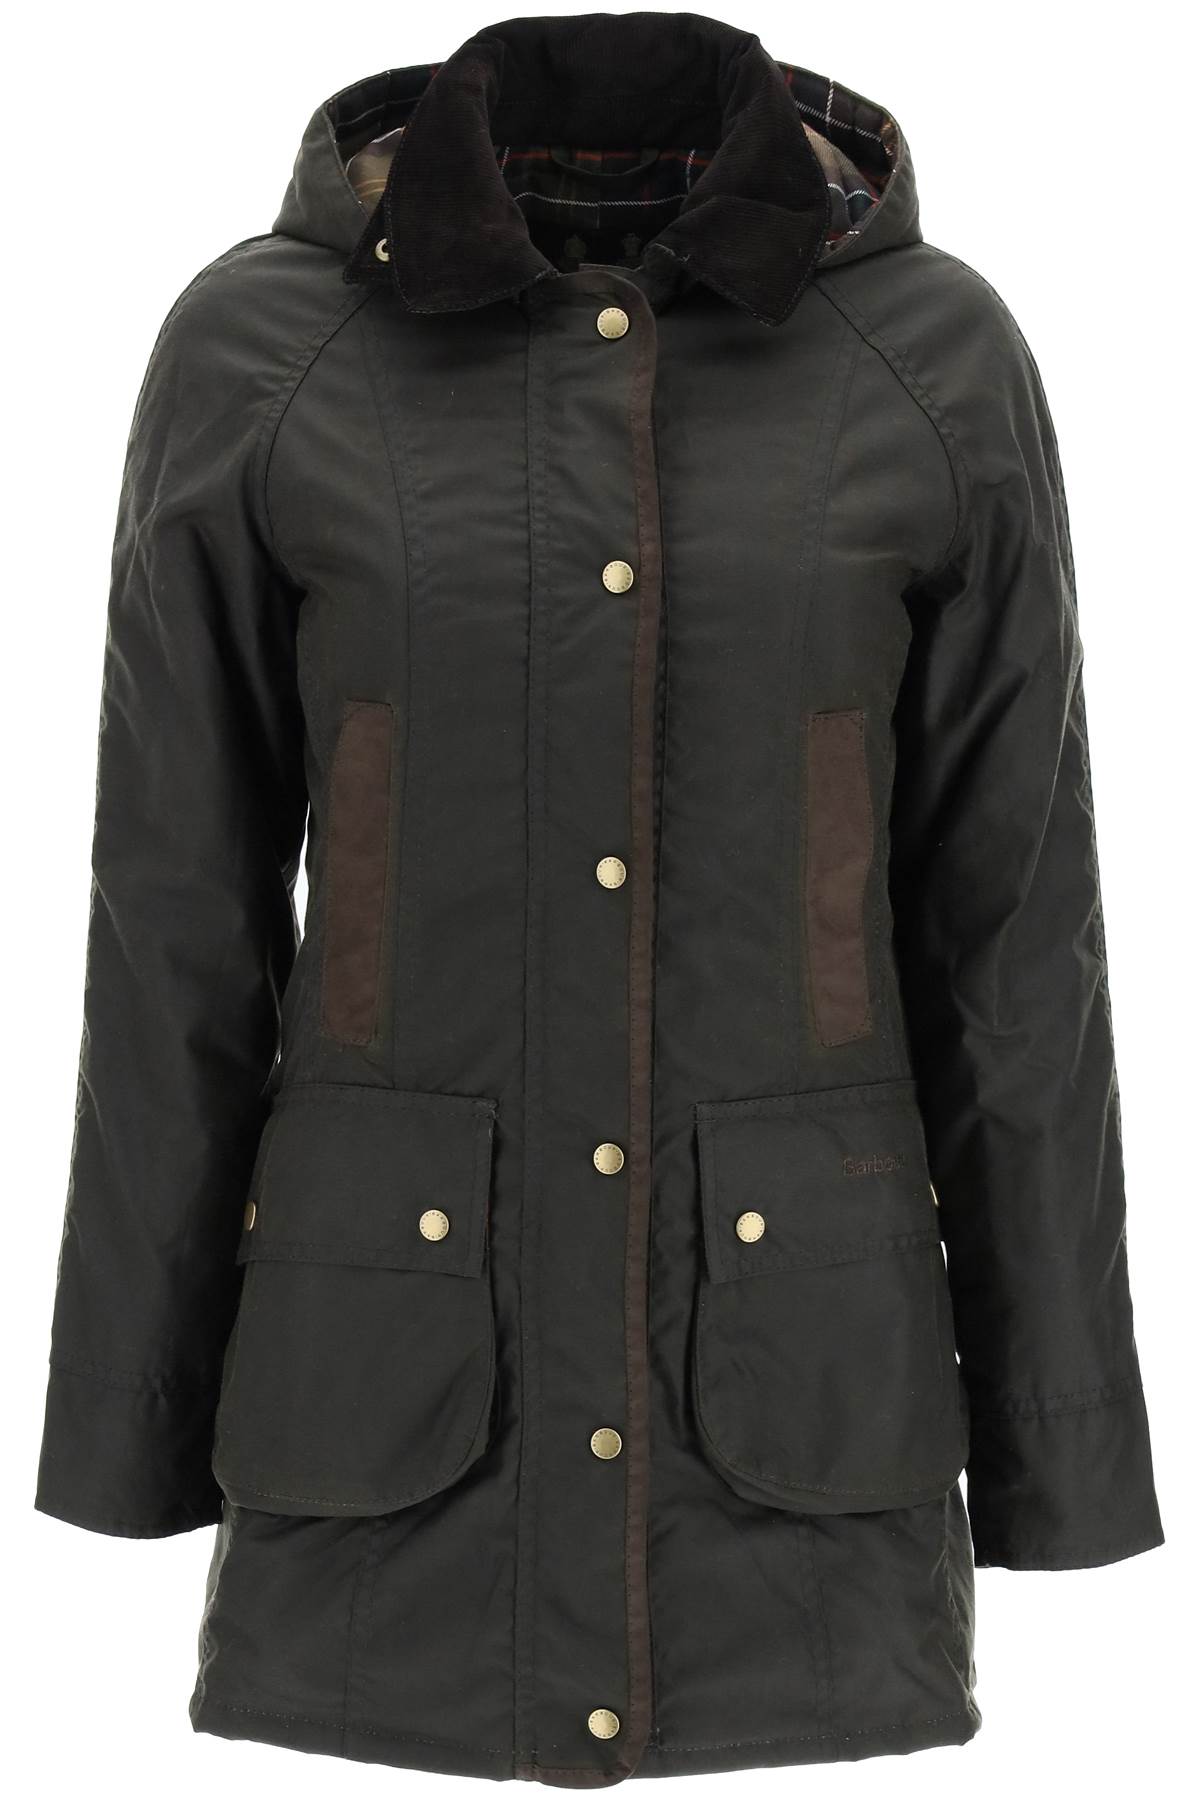 Barbour bower Hooded Wax Jacket